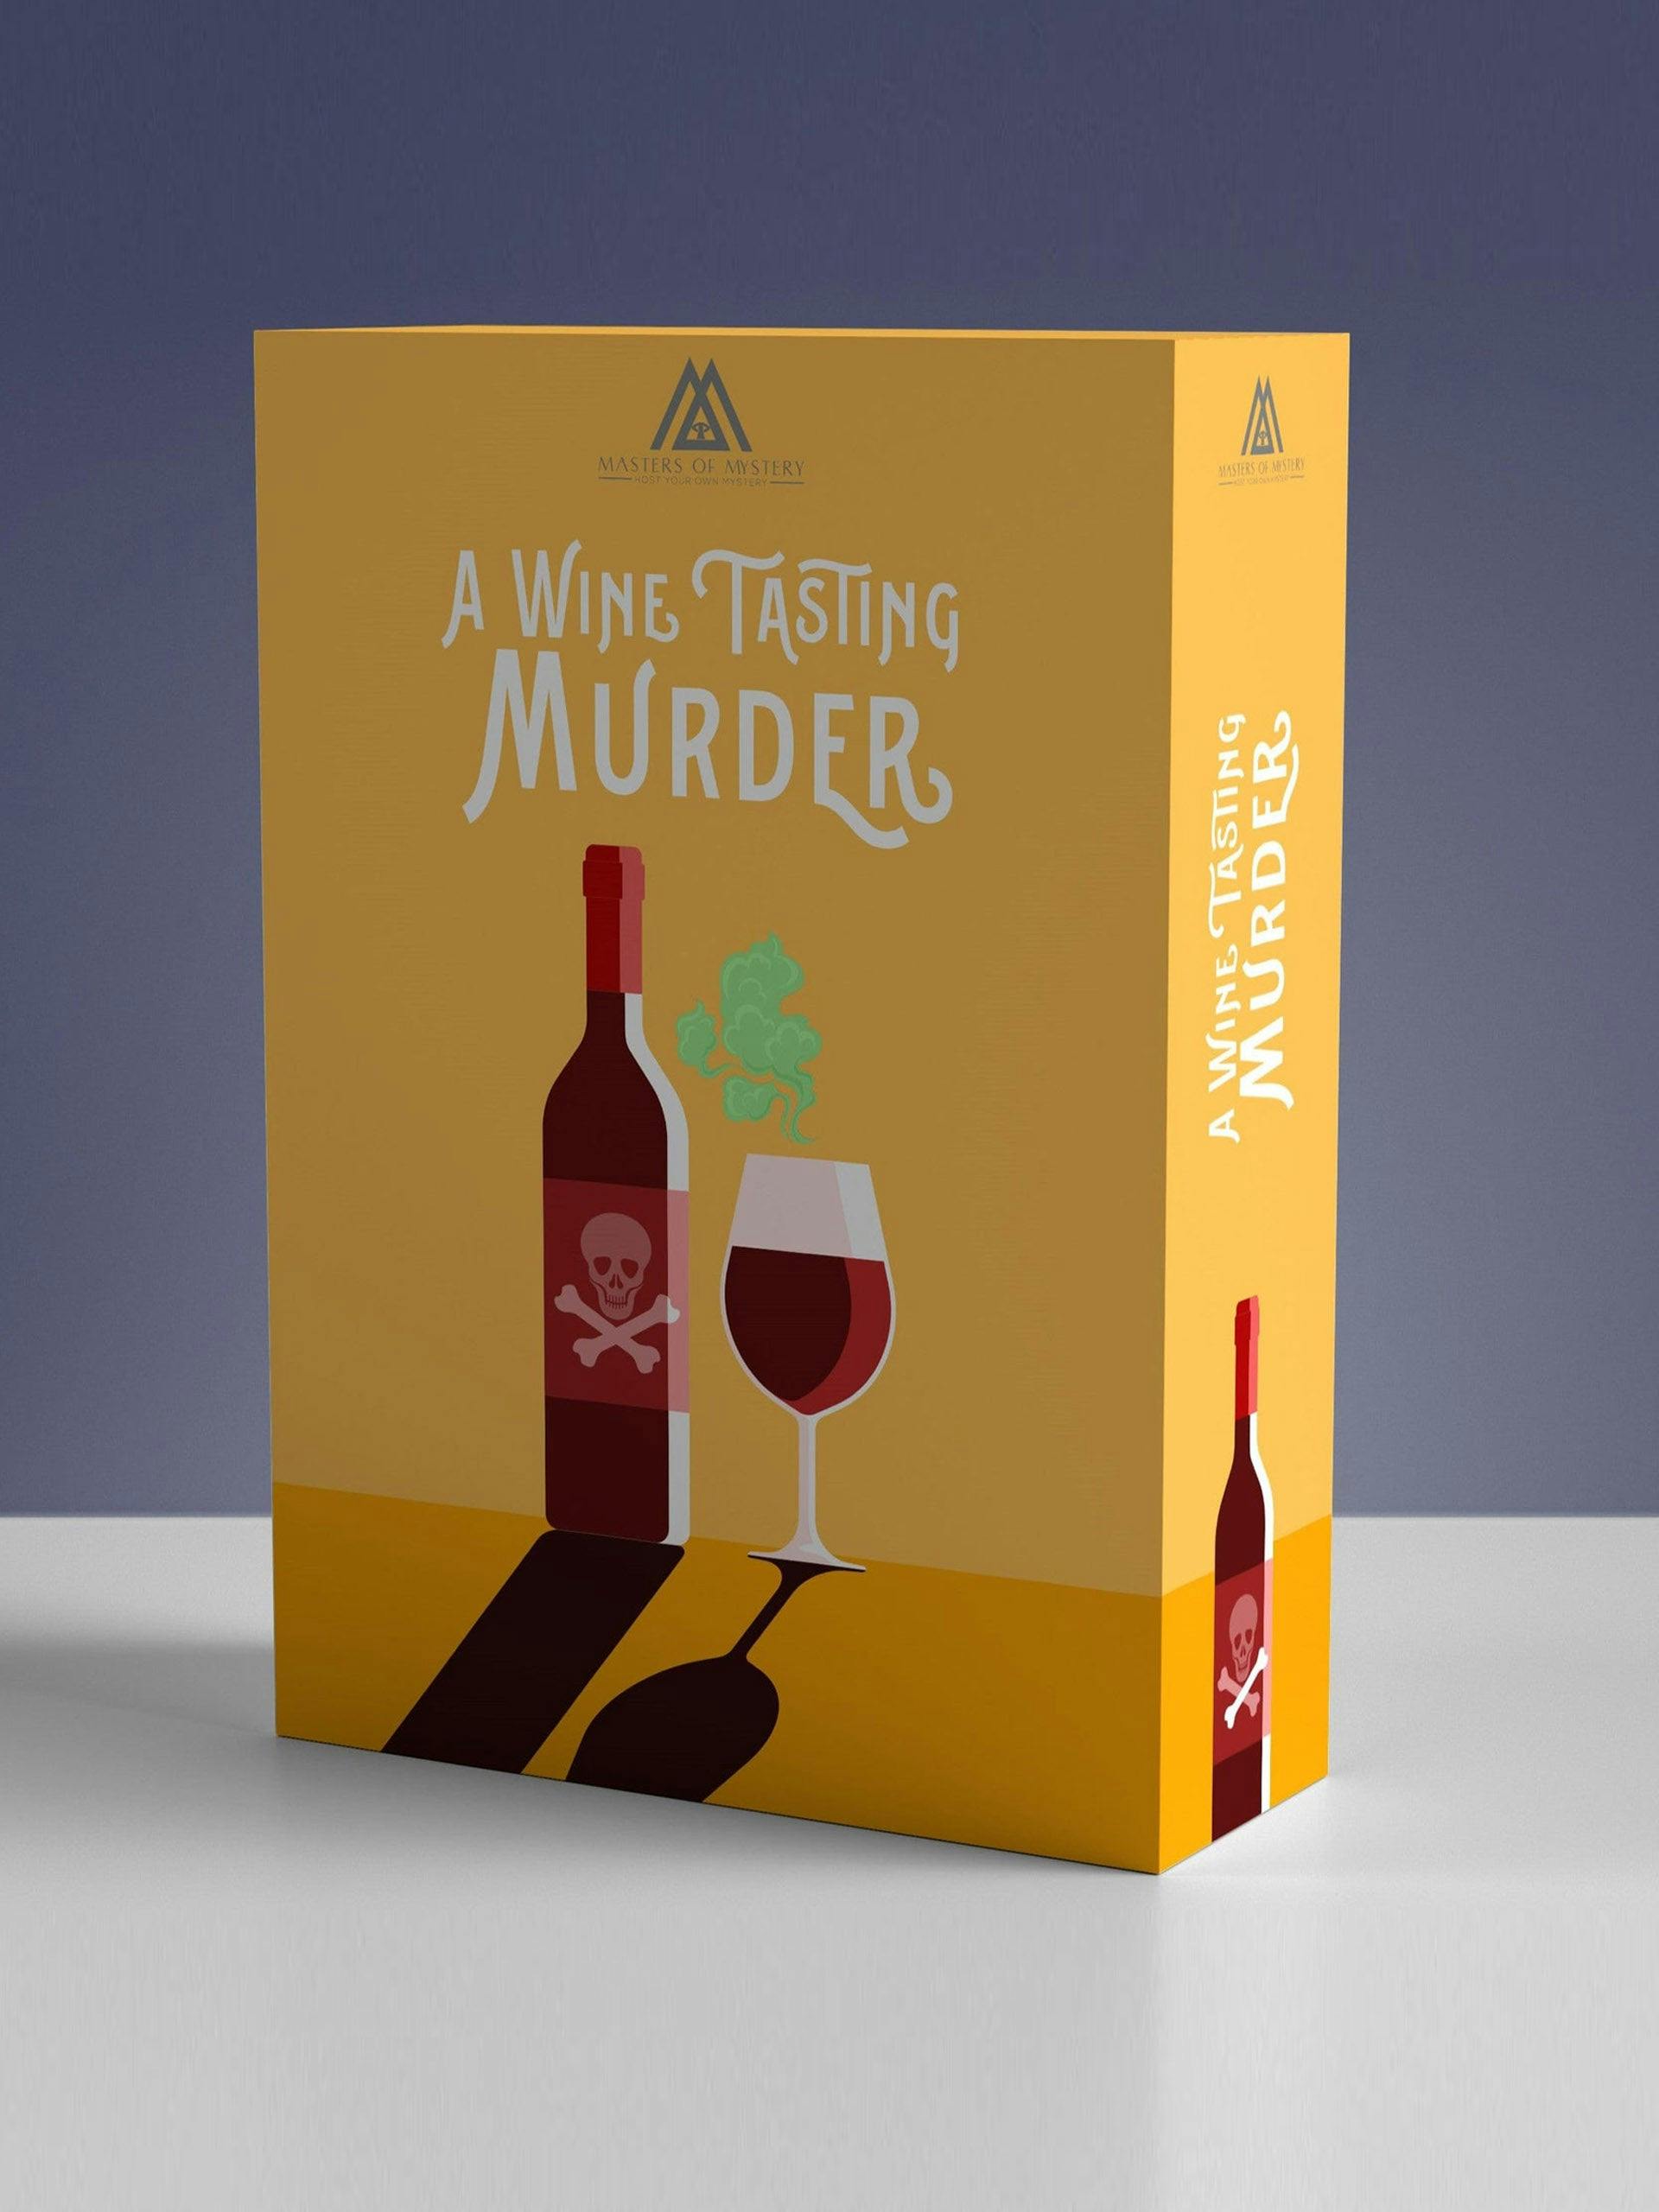 A wine tasting themed murder mystery game kit